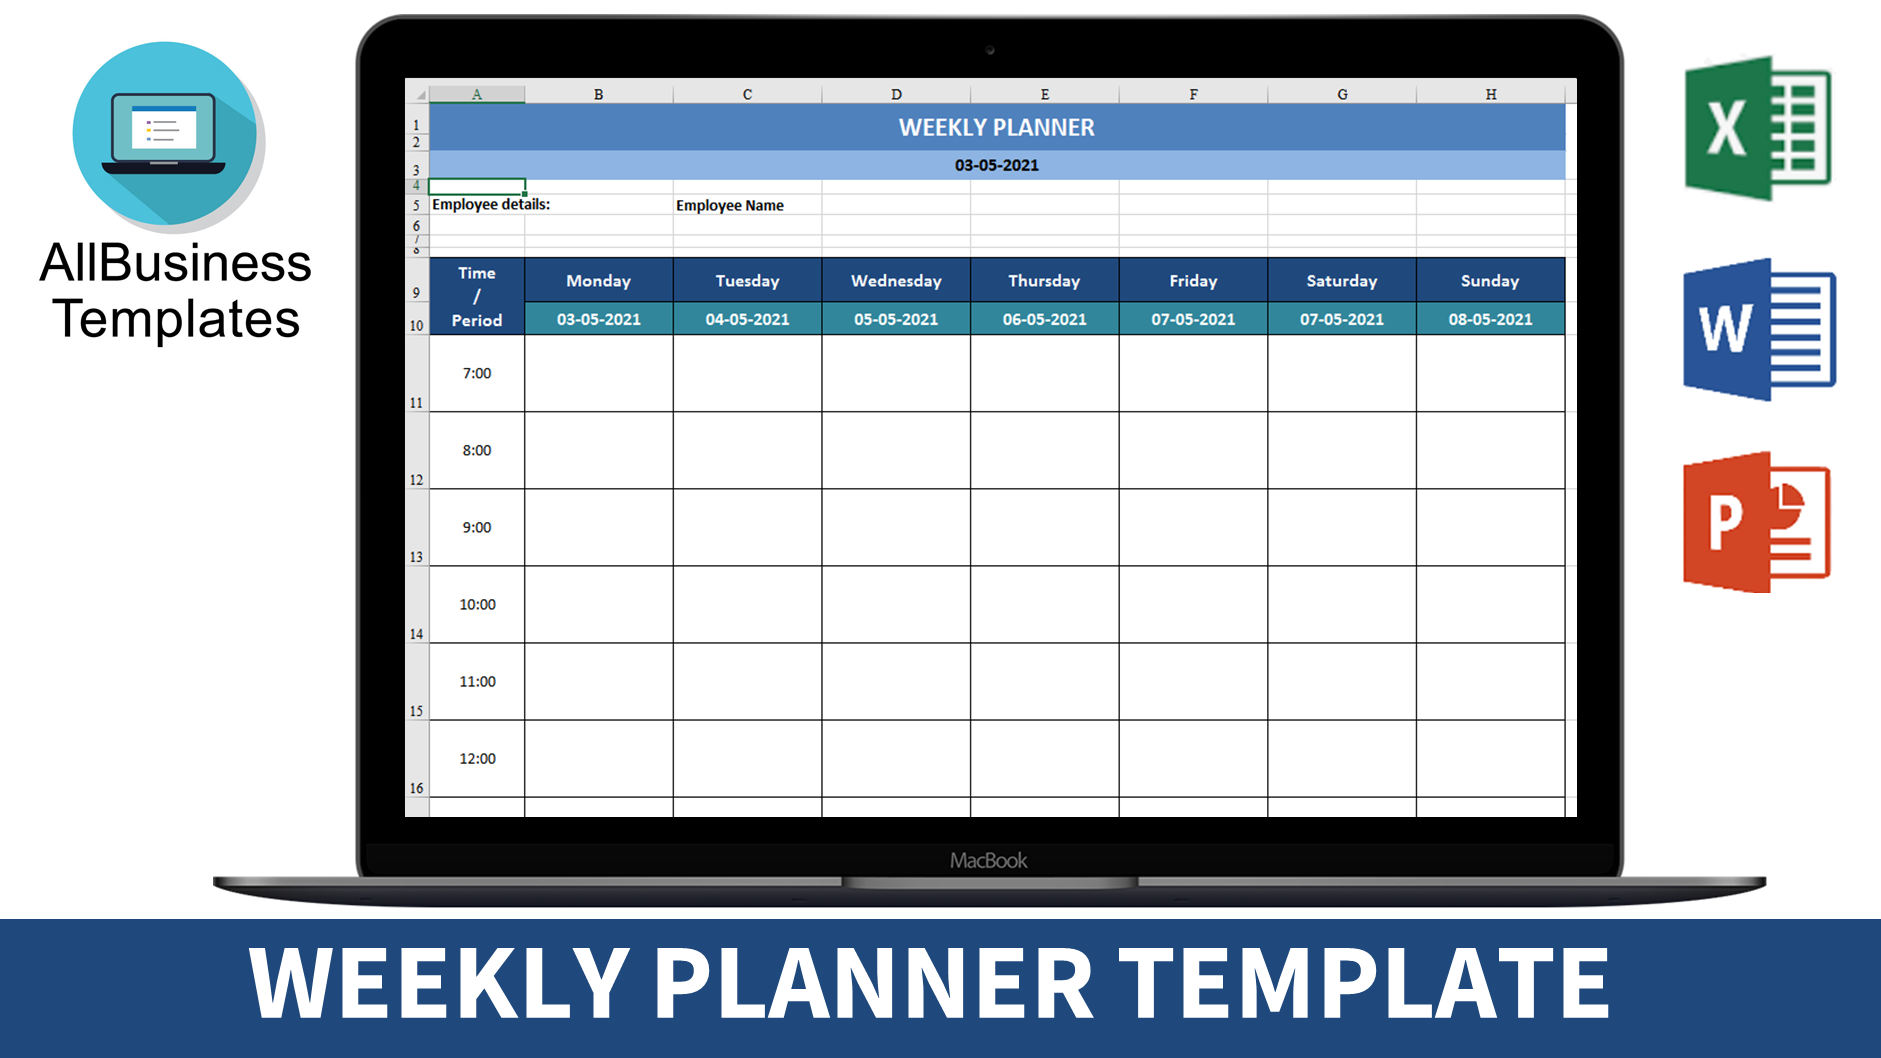 Weekly planner template main image